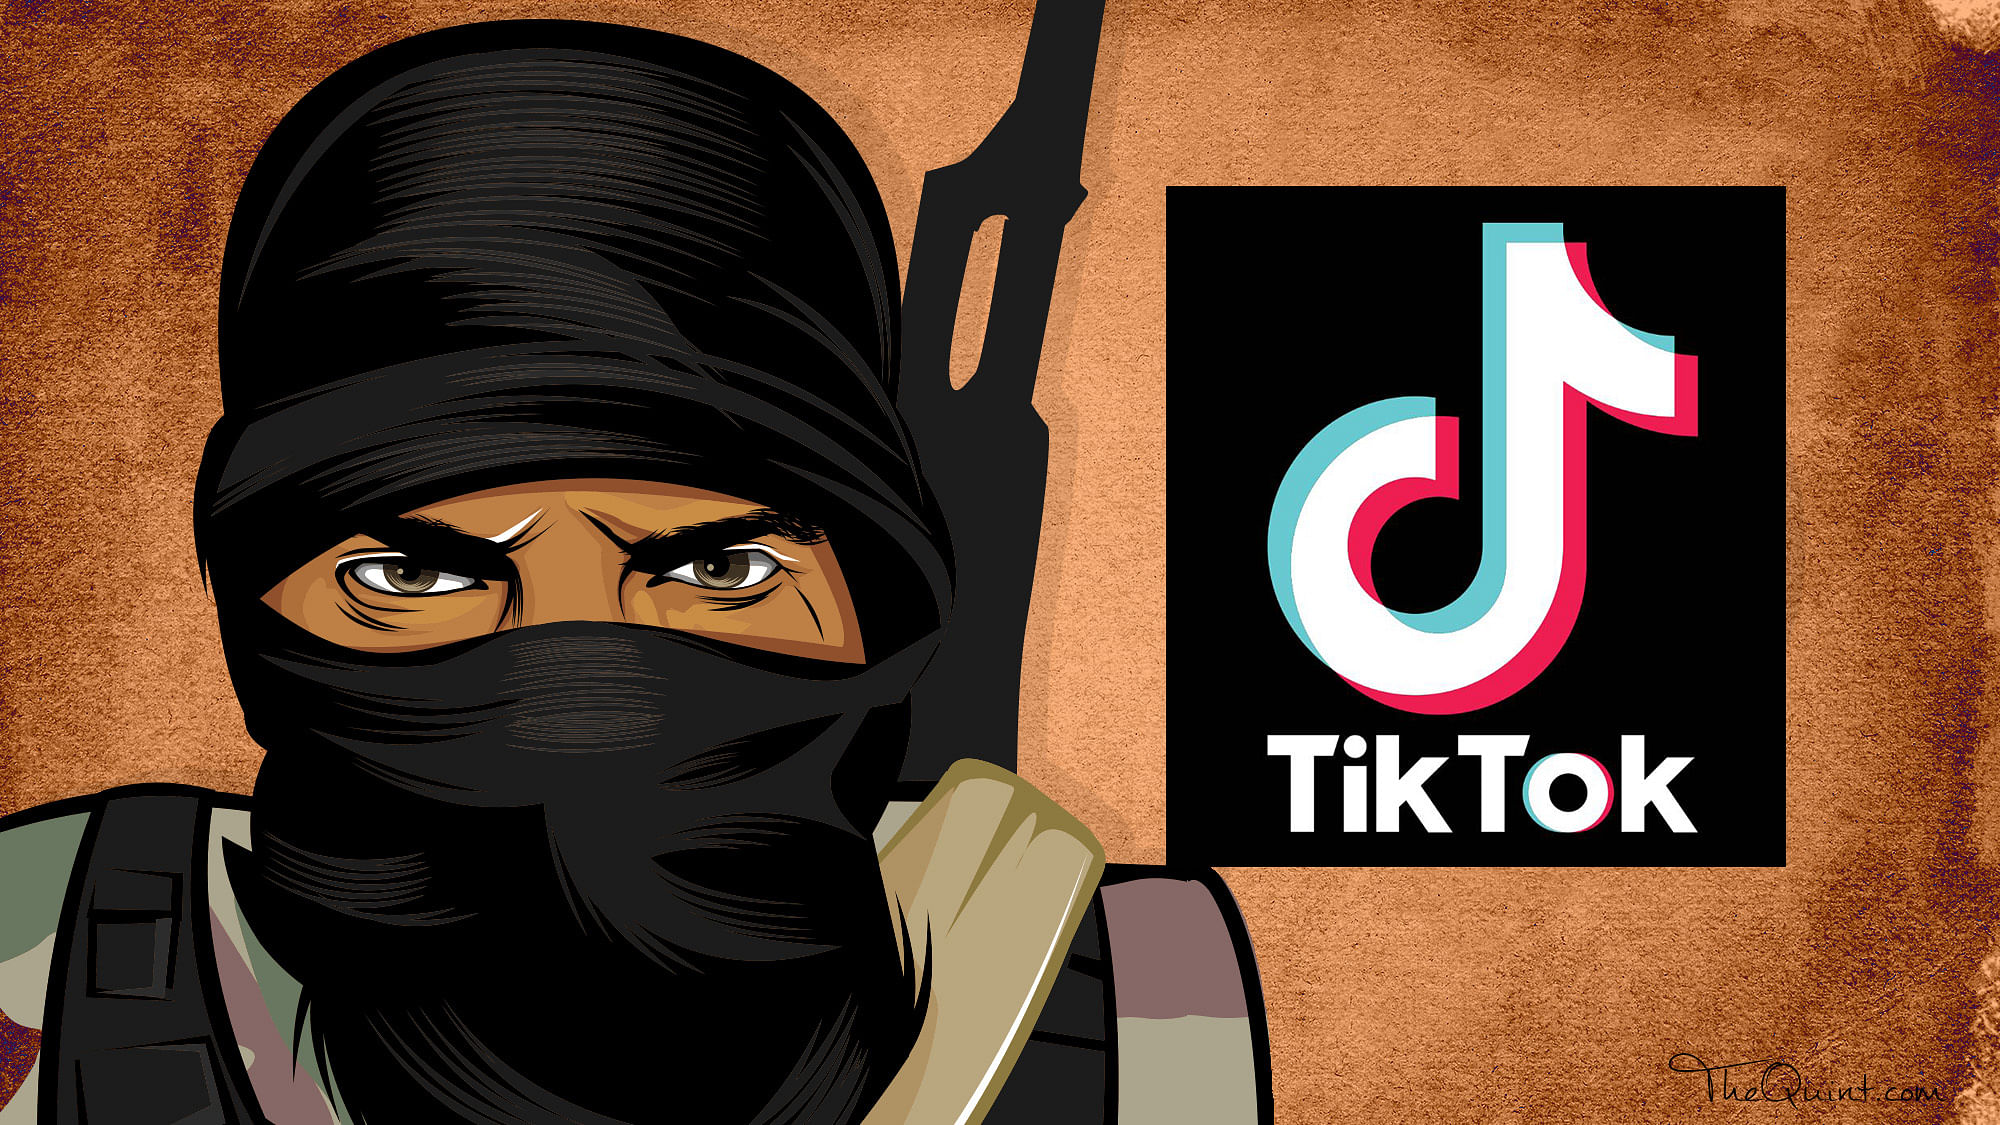 New trouble brewing for TikTok this week?